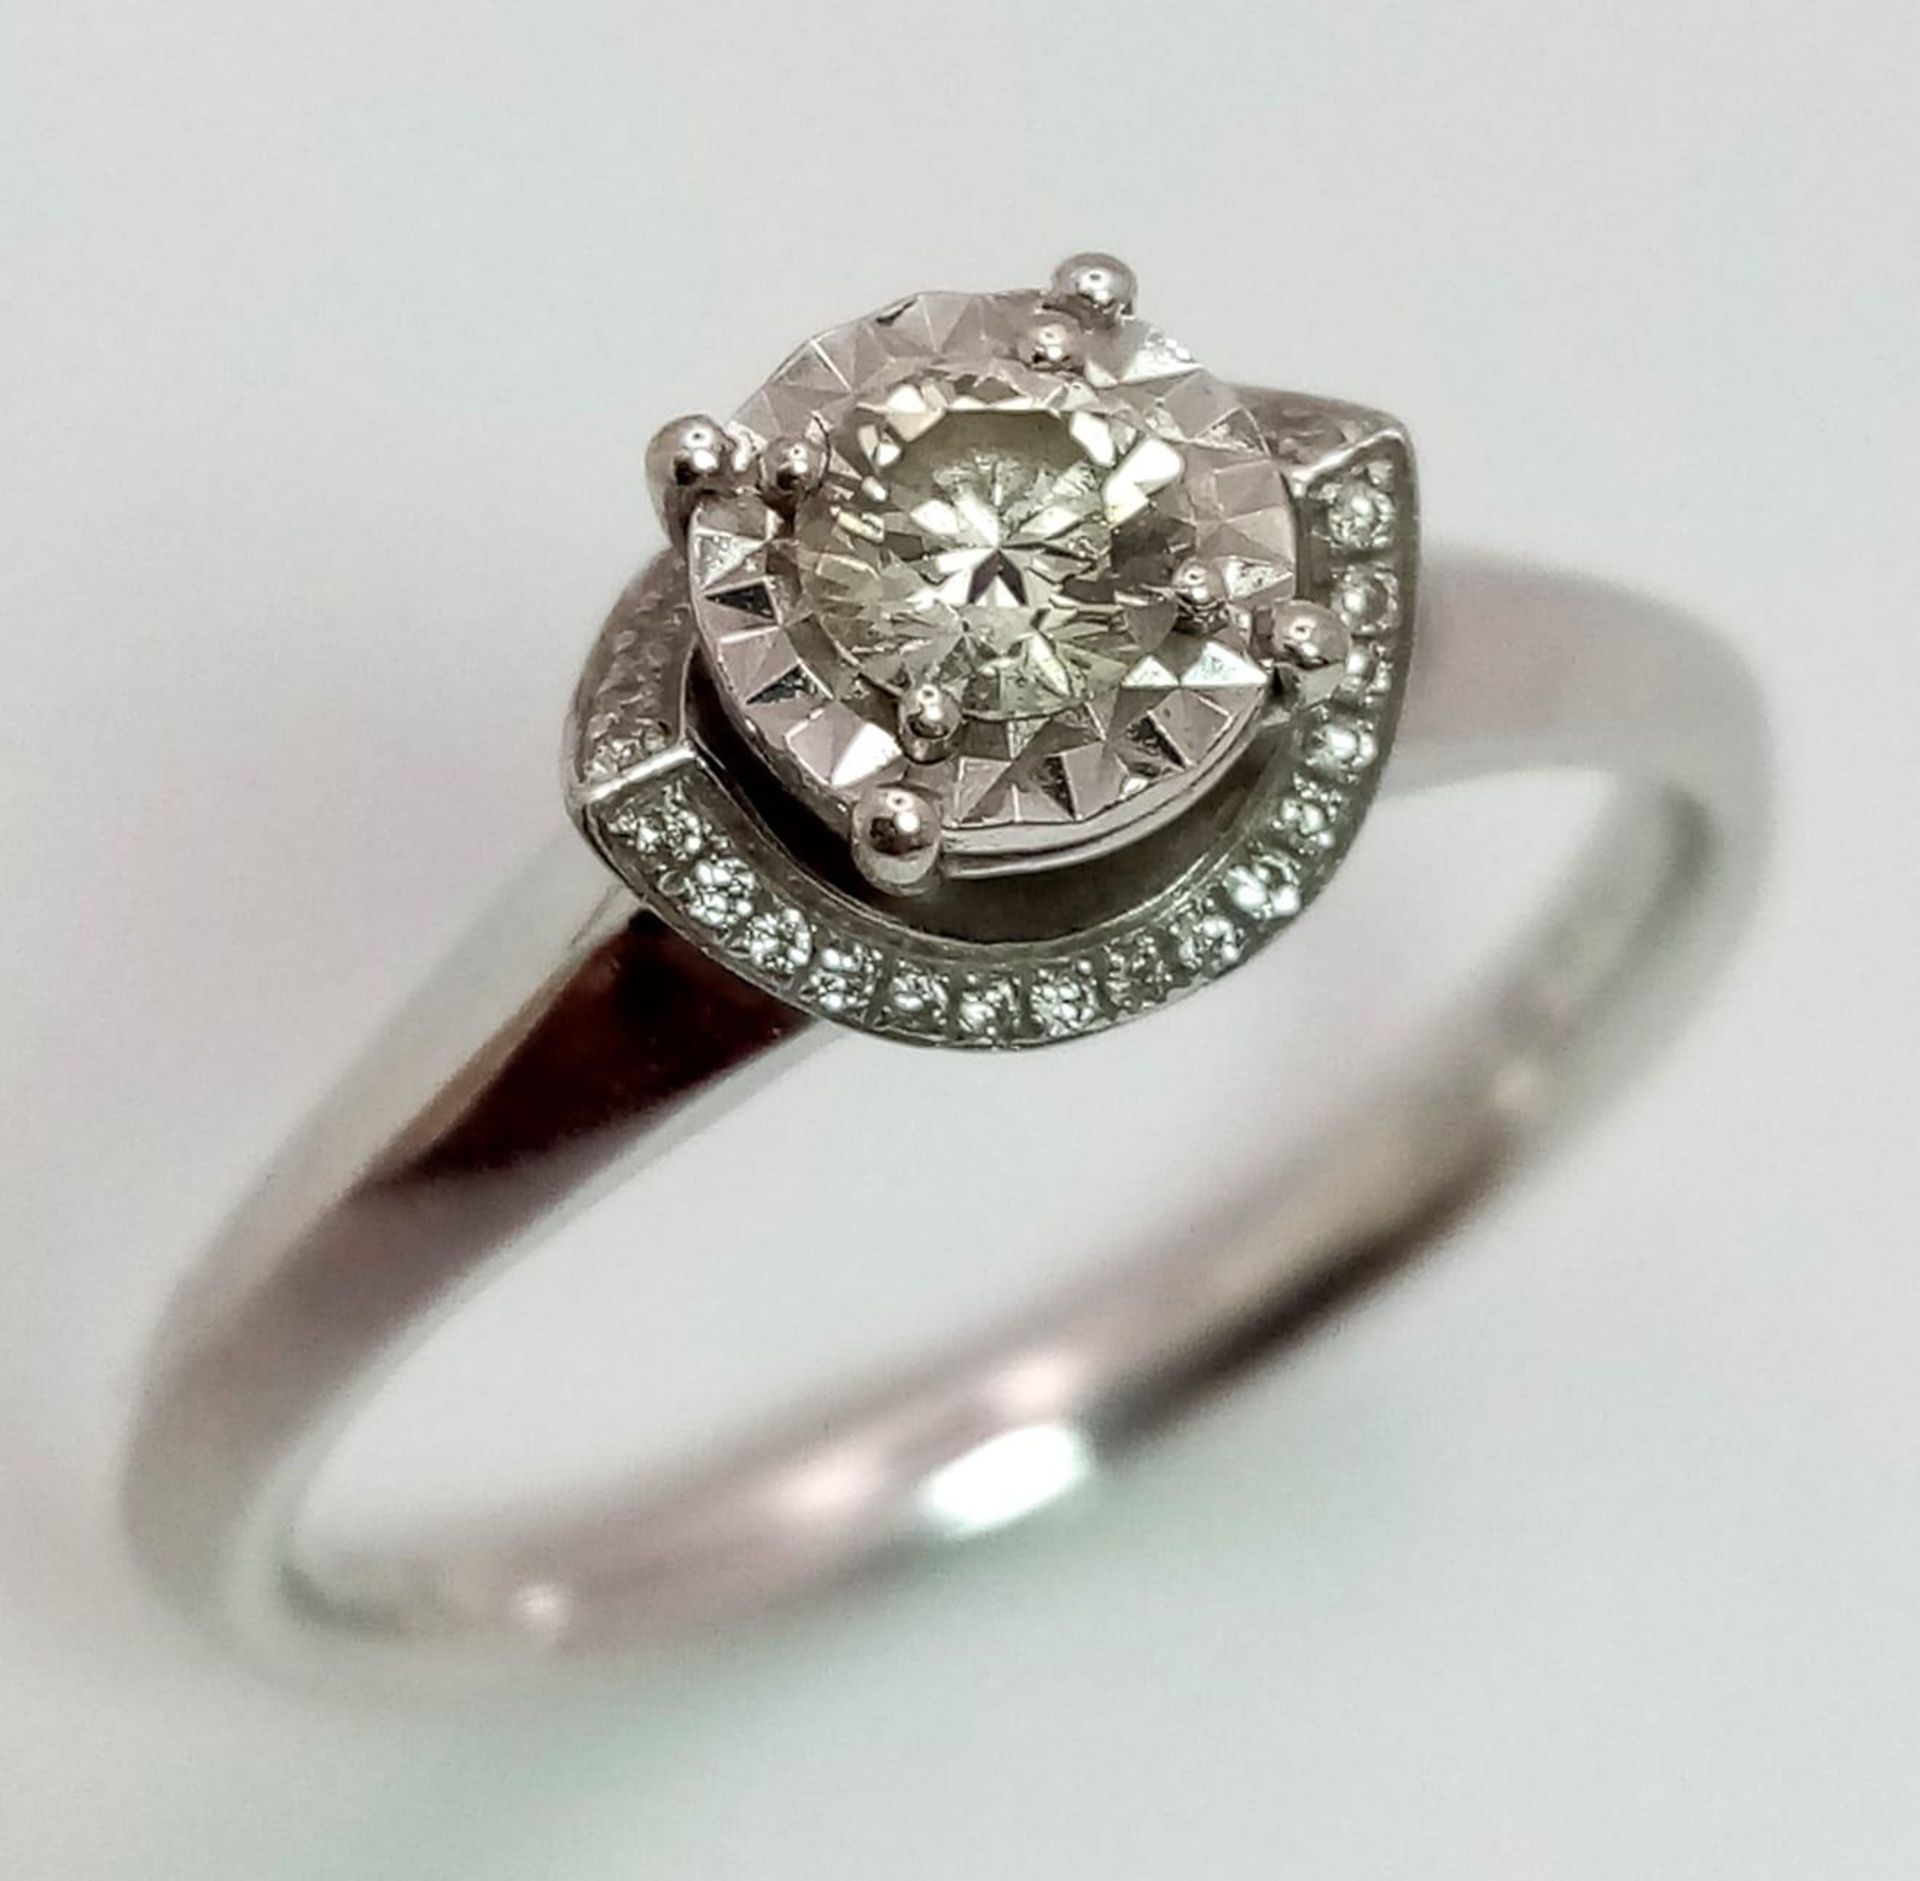 18K WHITE GOLD DIAMOND SOLITAIRE RING 0.18CT 3.6G SIZE M - Image 2 of 4